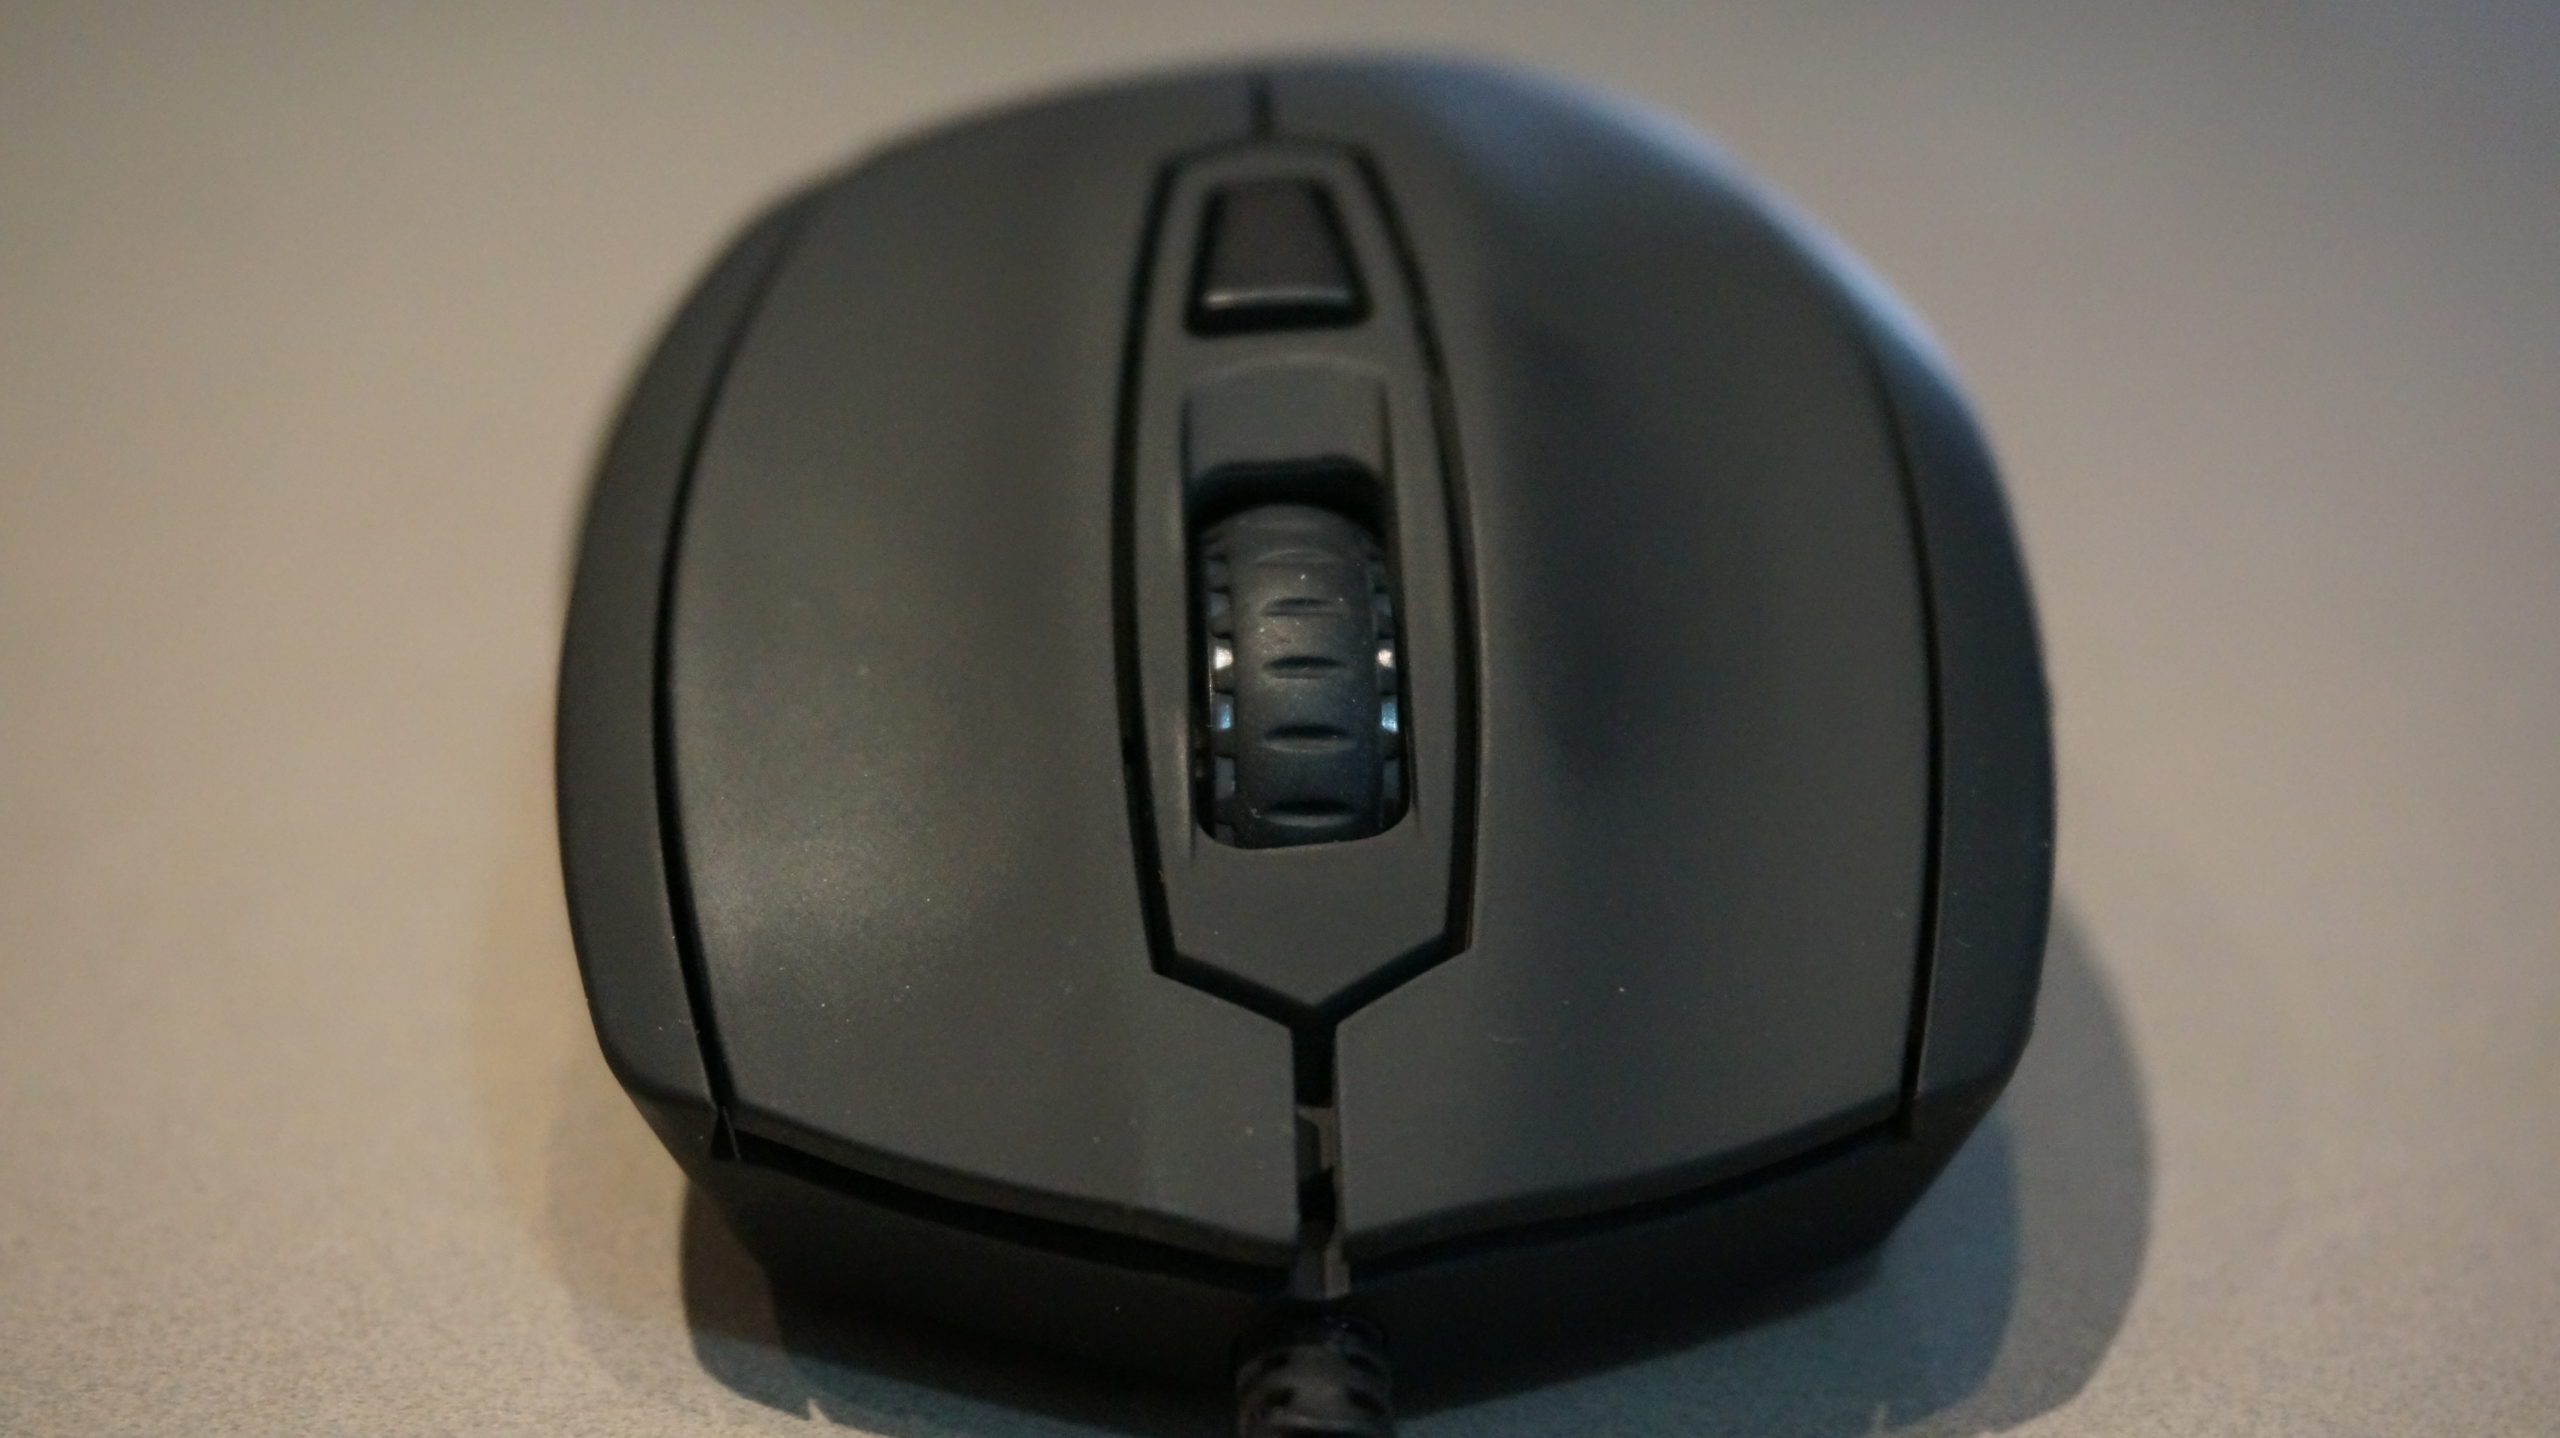 Taking Mionix’s New Gaming Mouse For A Spin